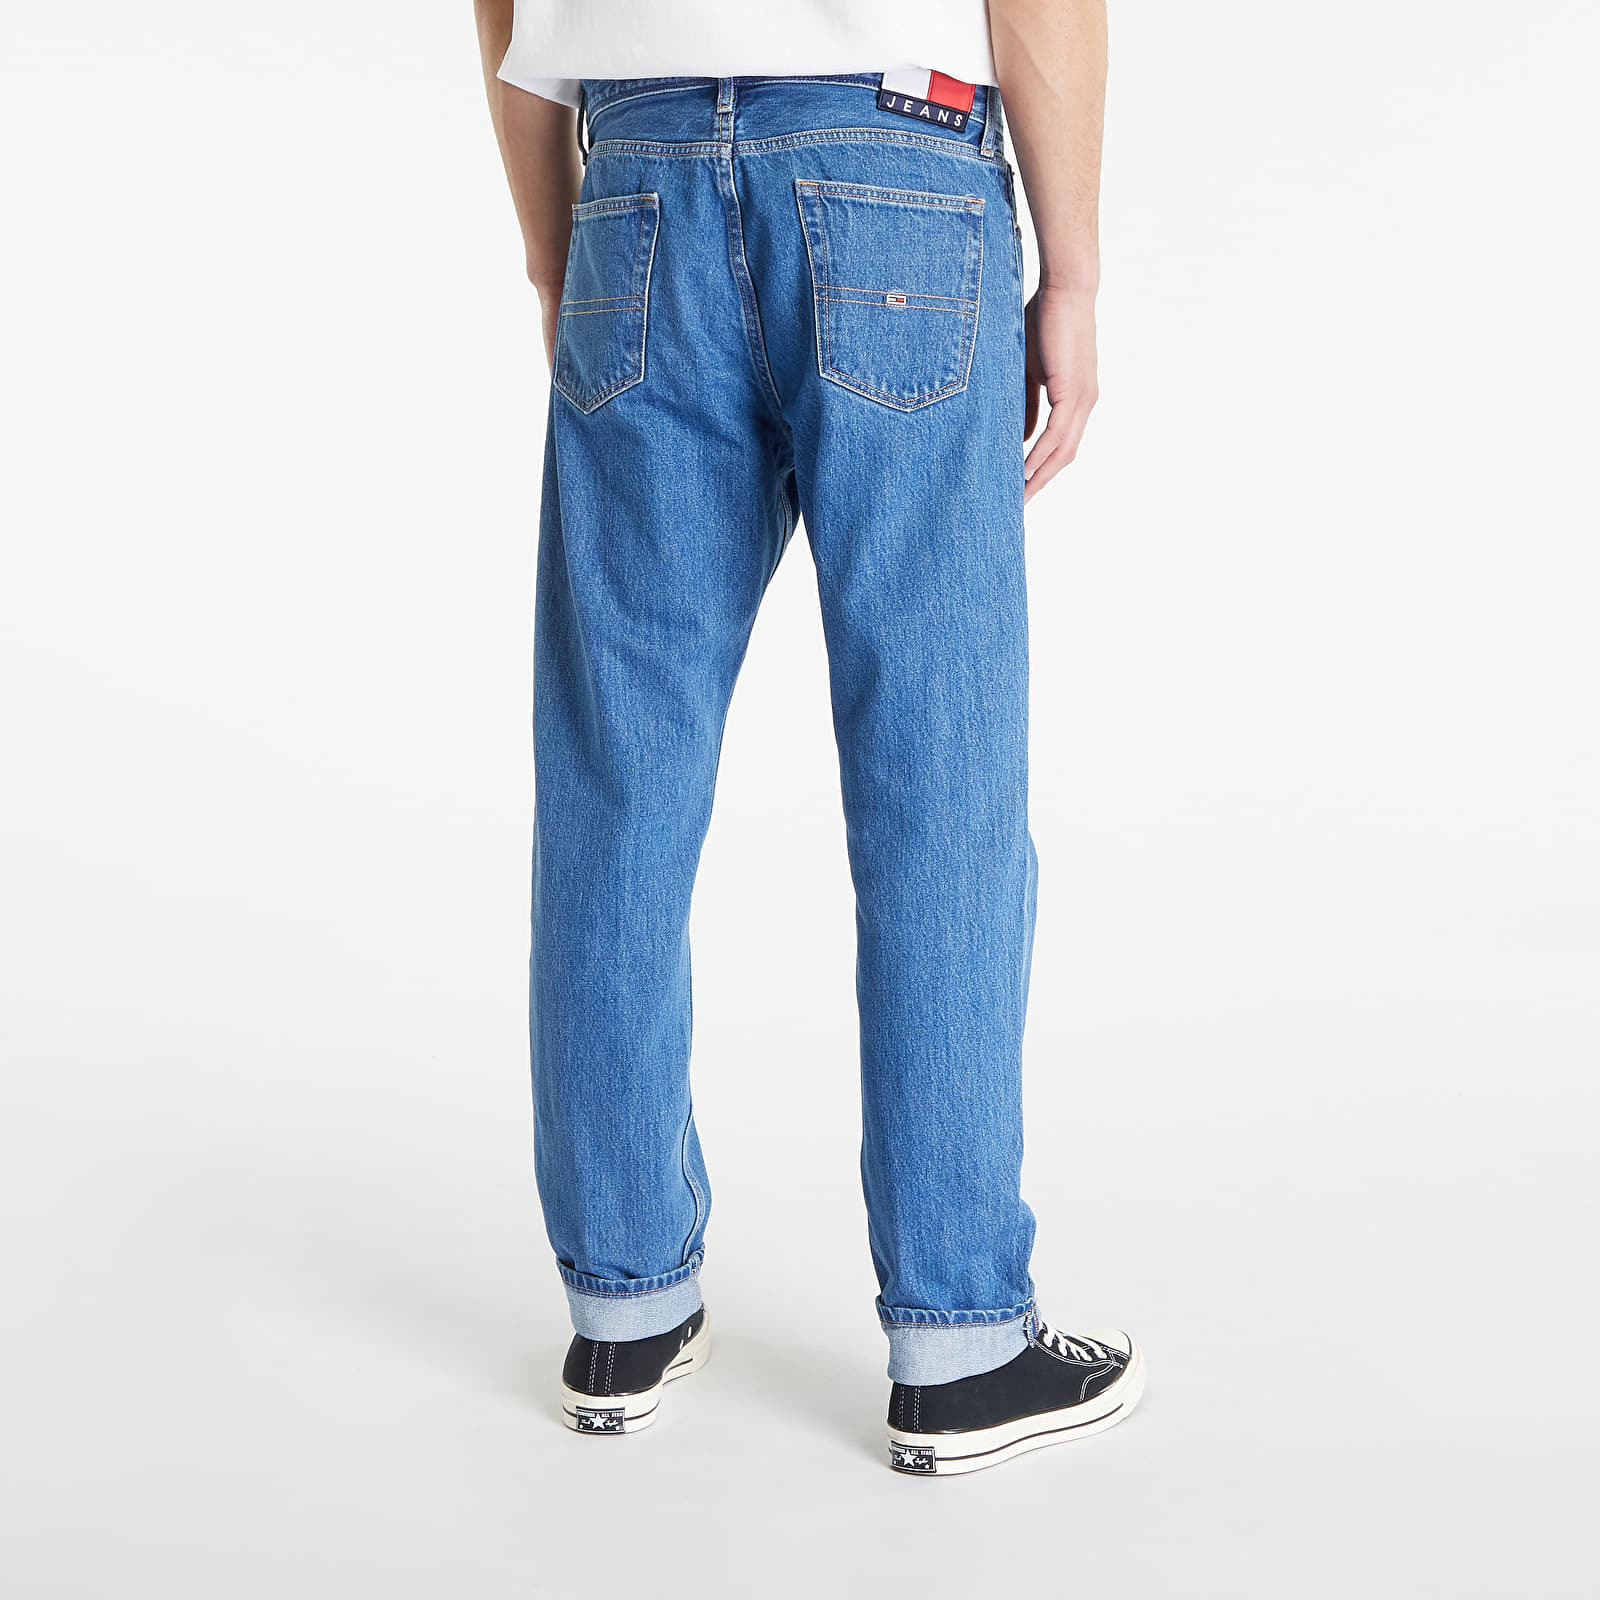 Tommy Hilfiger - Tommy Jeans Ethan Relaxed Straight Jeans Denim